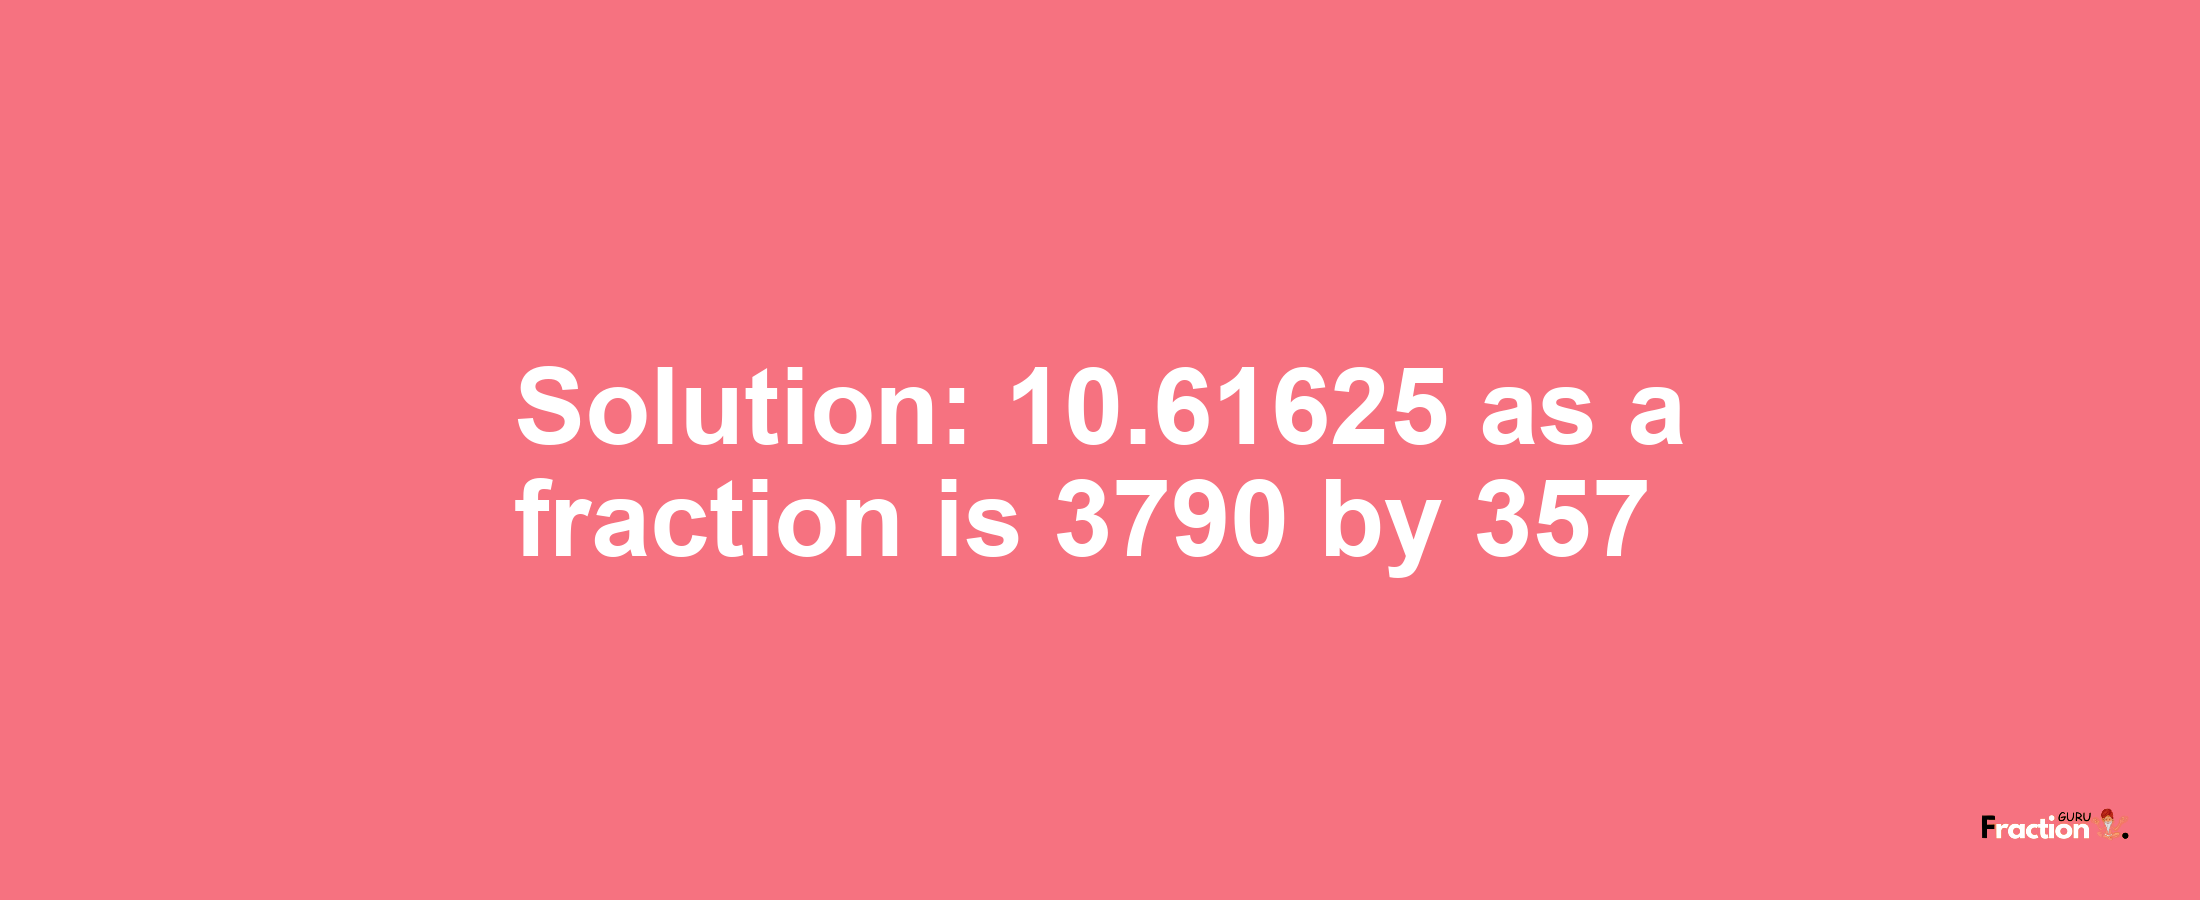 Solution:10.61625 as a fraction is 3790/357